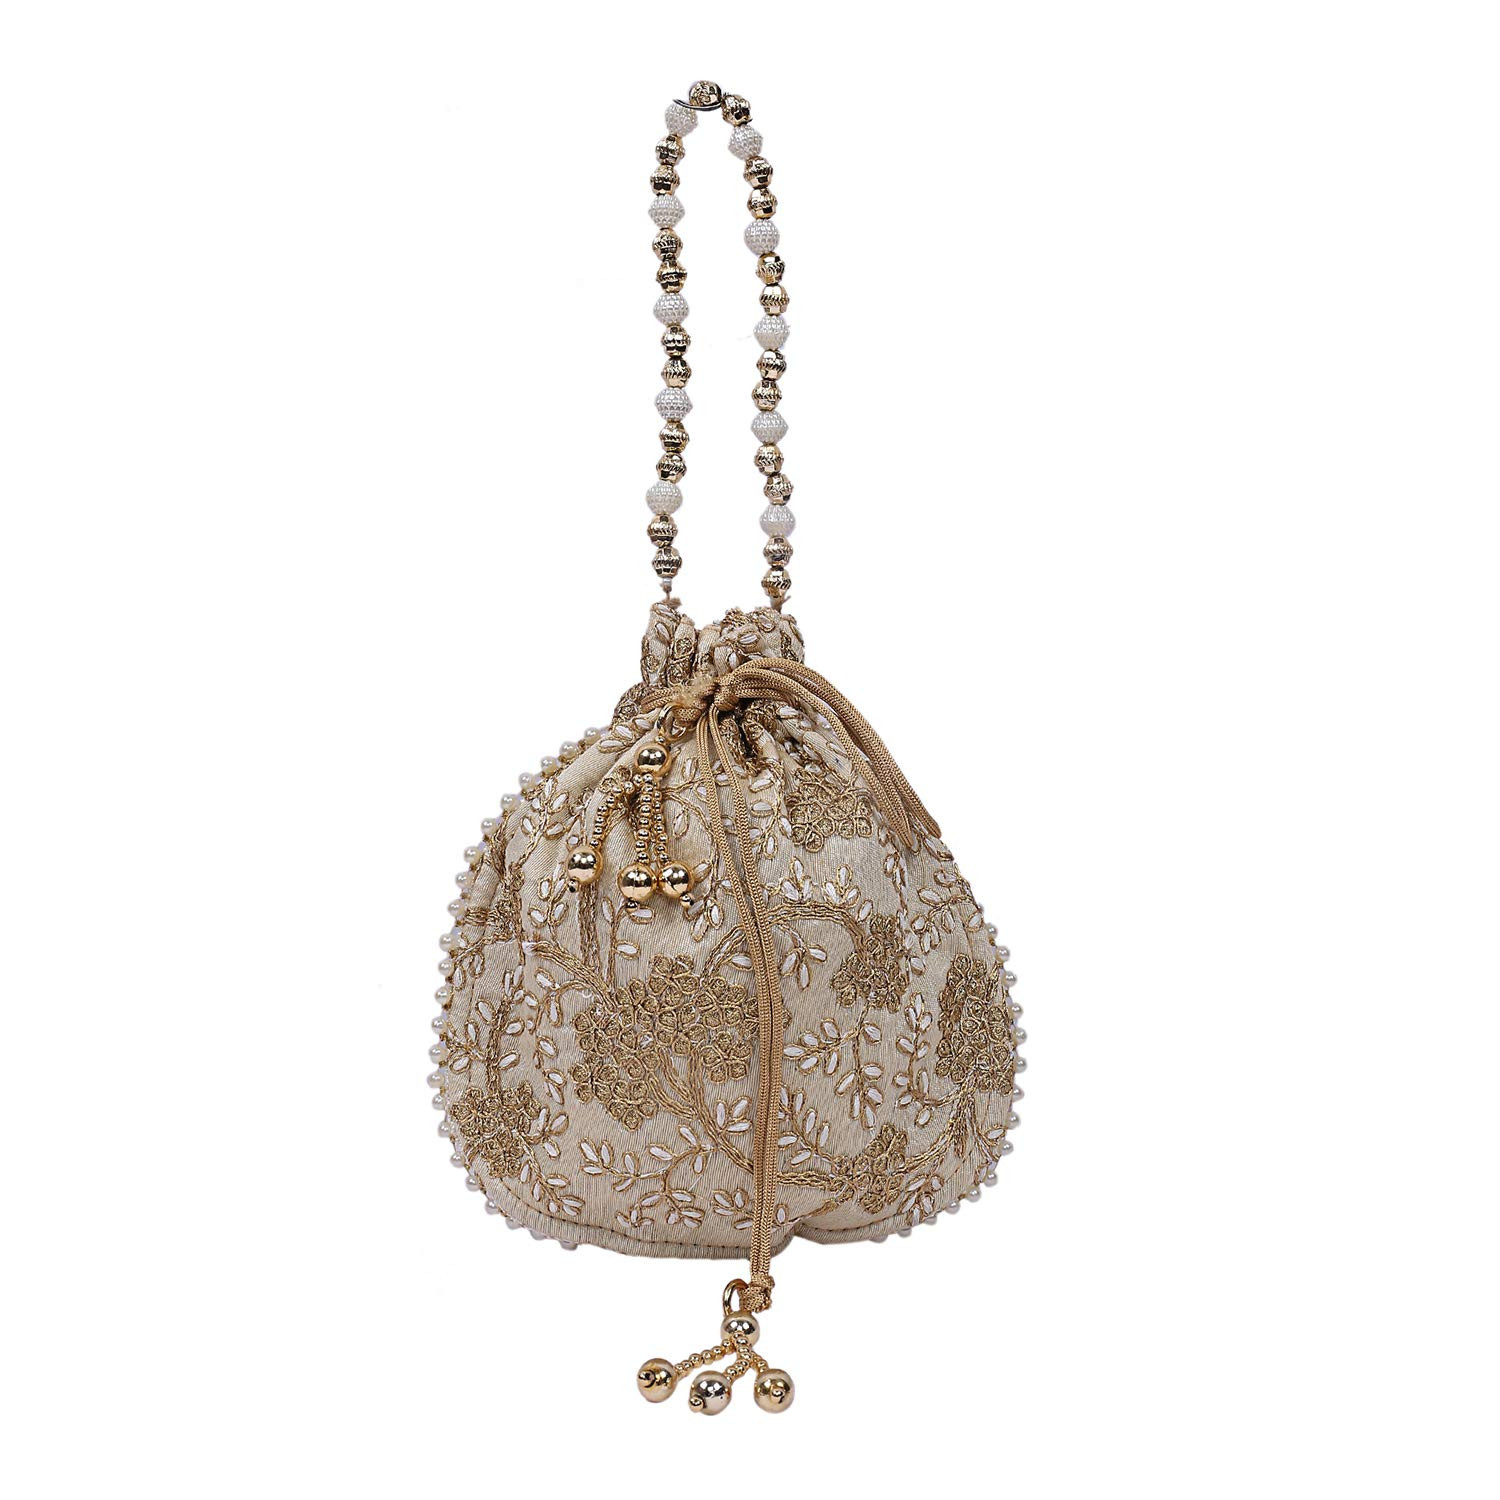 Kuber Industries Embroidery Drawstring Potli|Hand Purse With Gold Pearl Border & Handle For Woman,Girls (Cream)